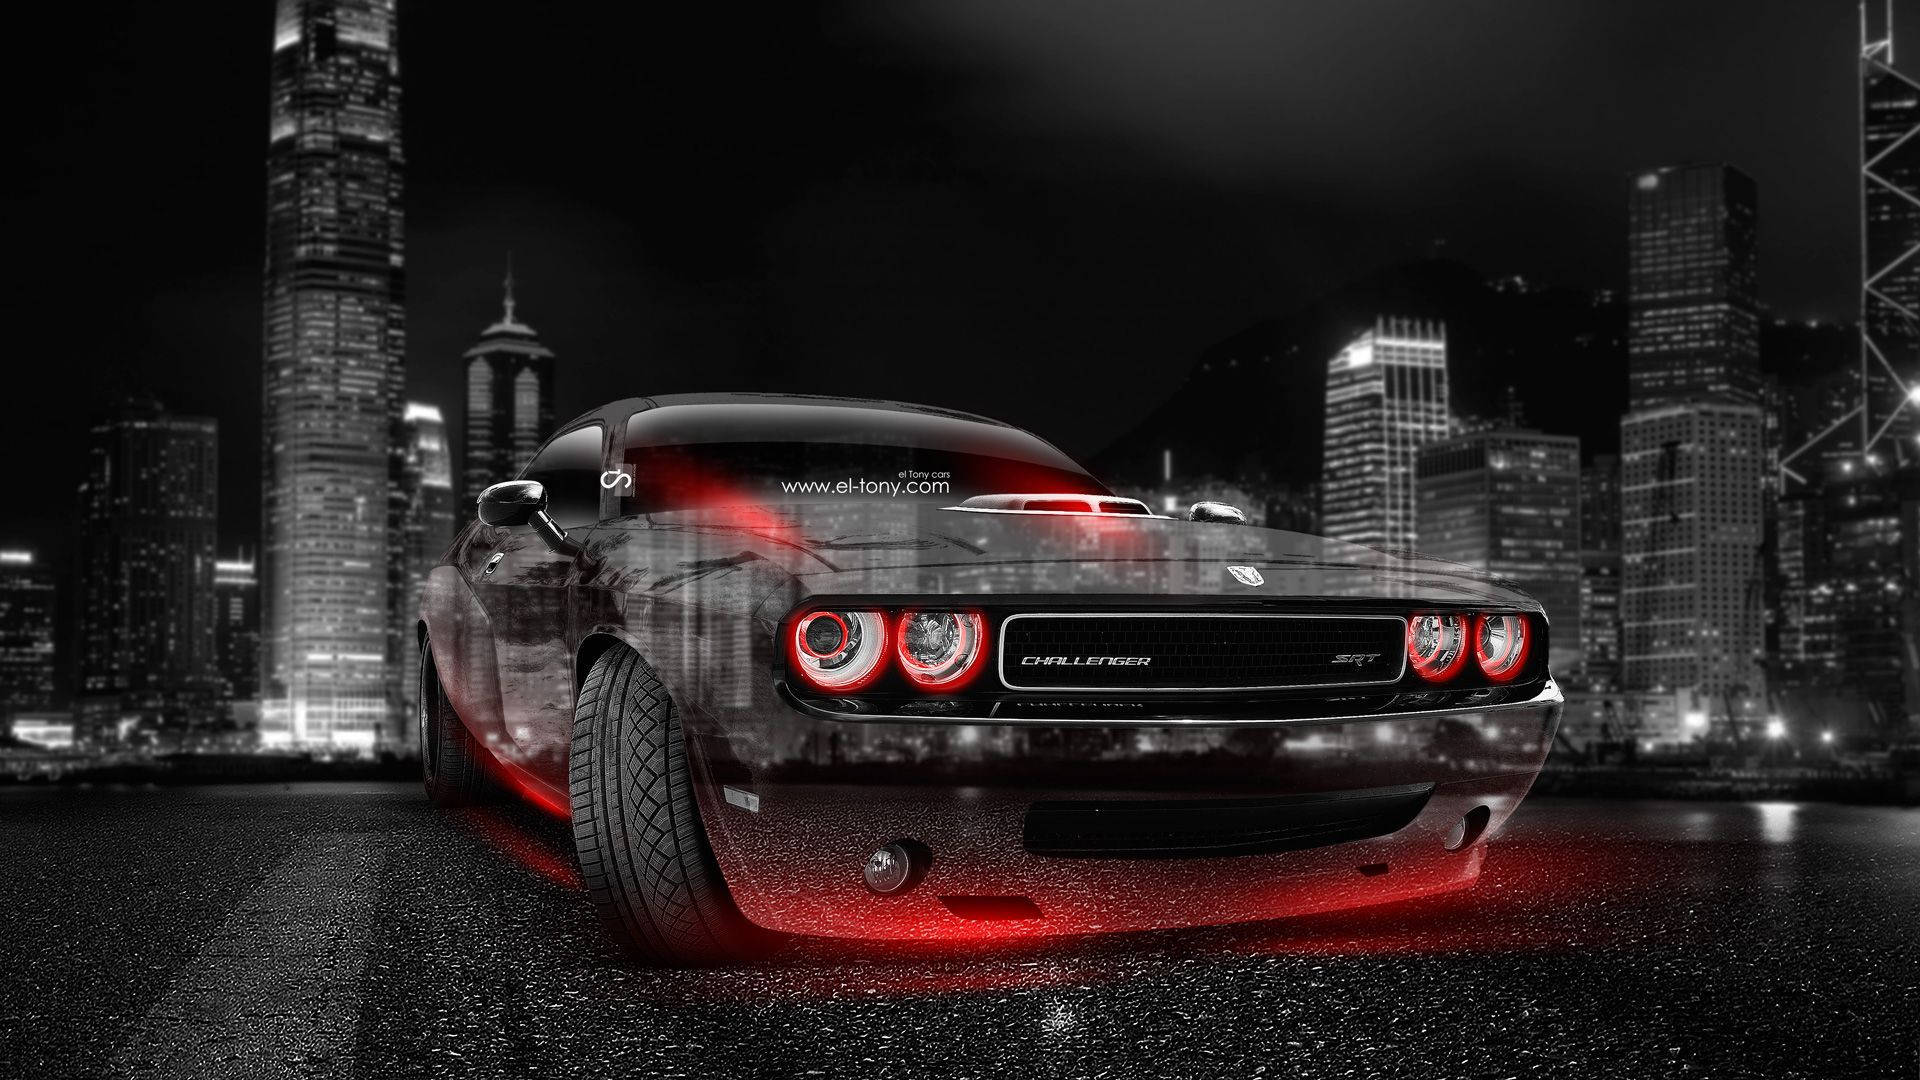 Dodge Challenger With Red Halo Headlights Wallpaper